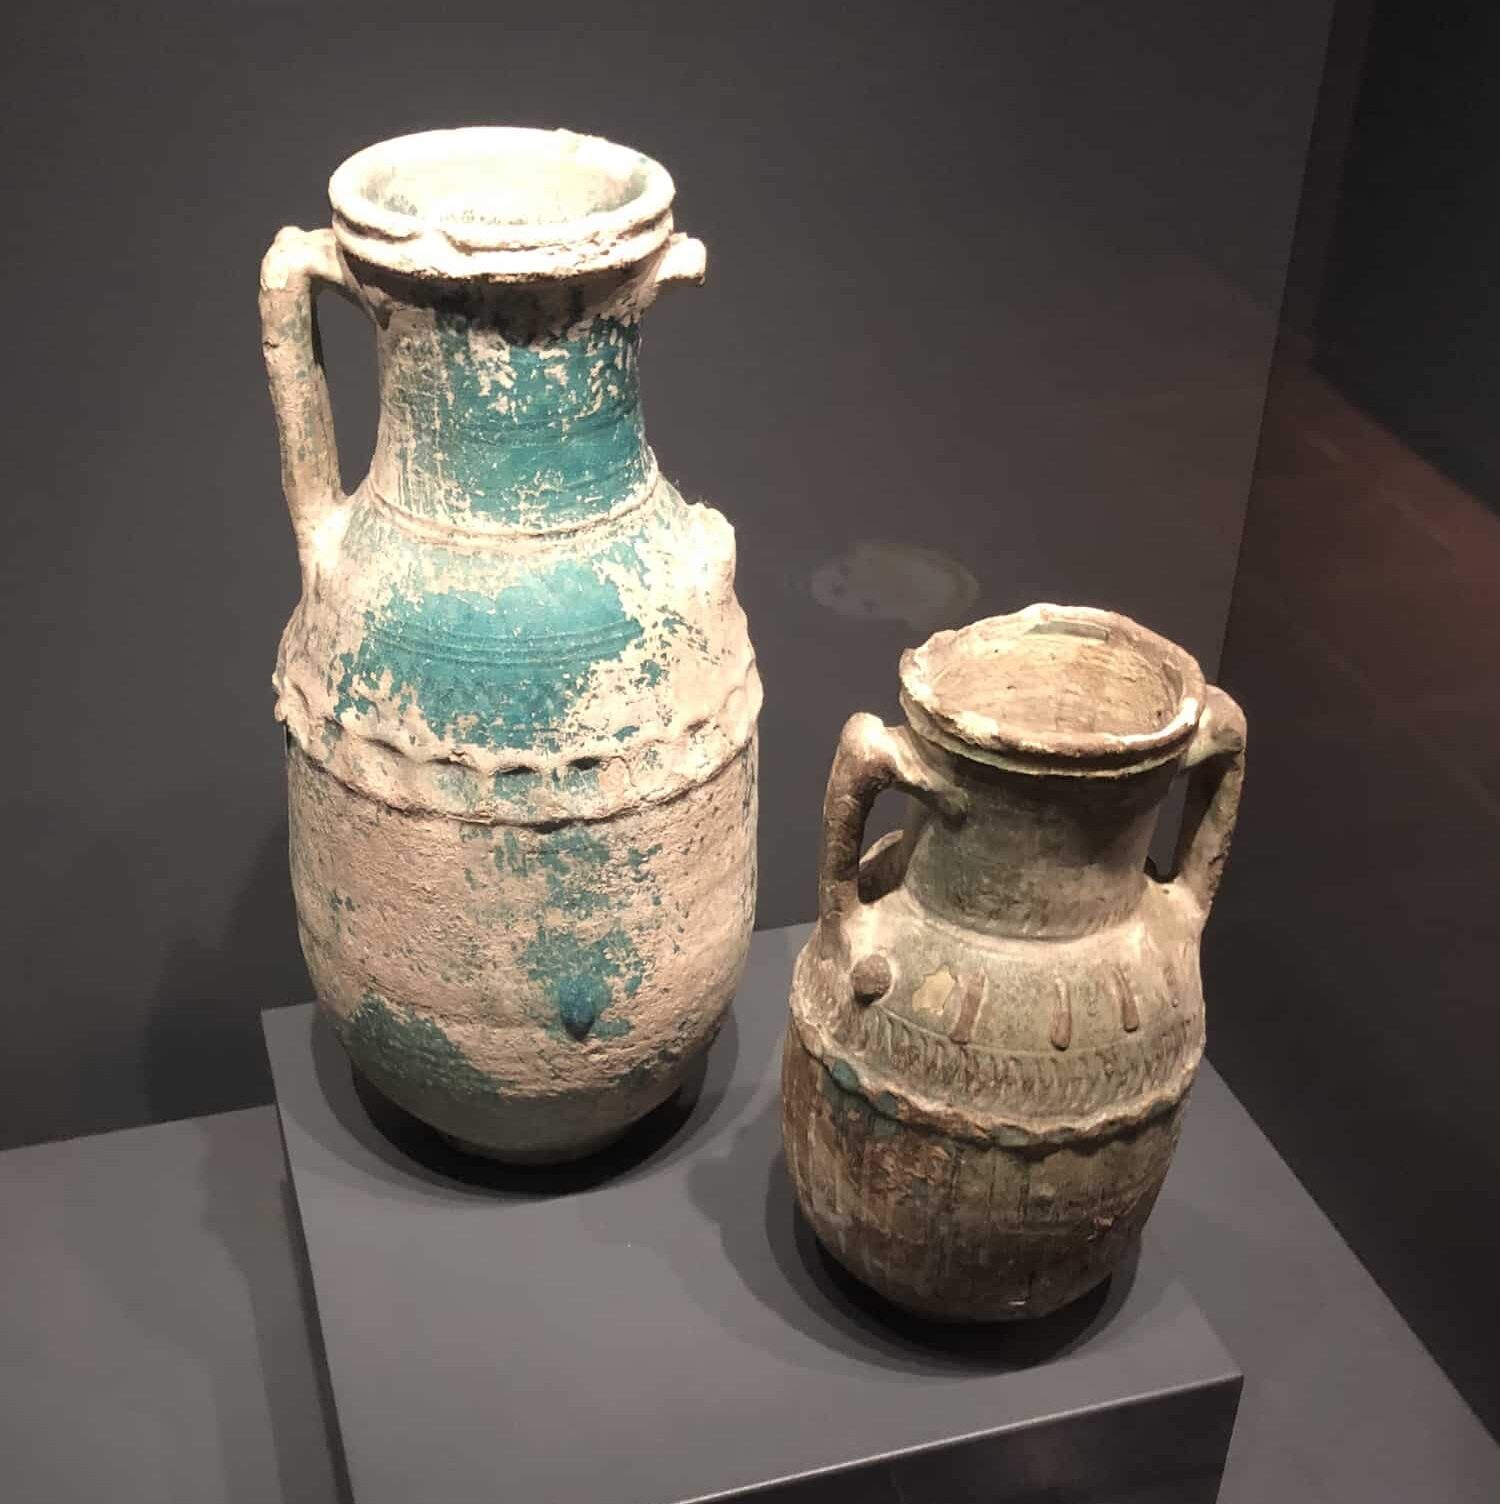 Pottery jars from the Umayyad period at the Museum of Turkish and Islamic Arts in Istanbul, Turkey